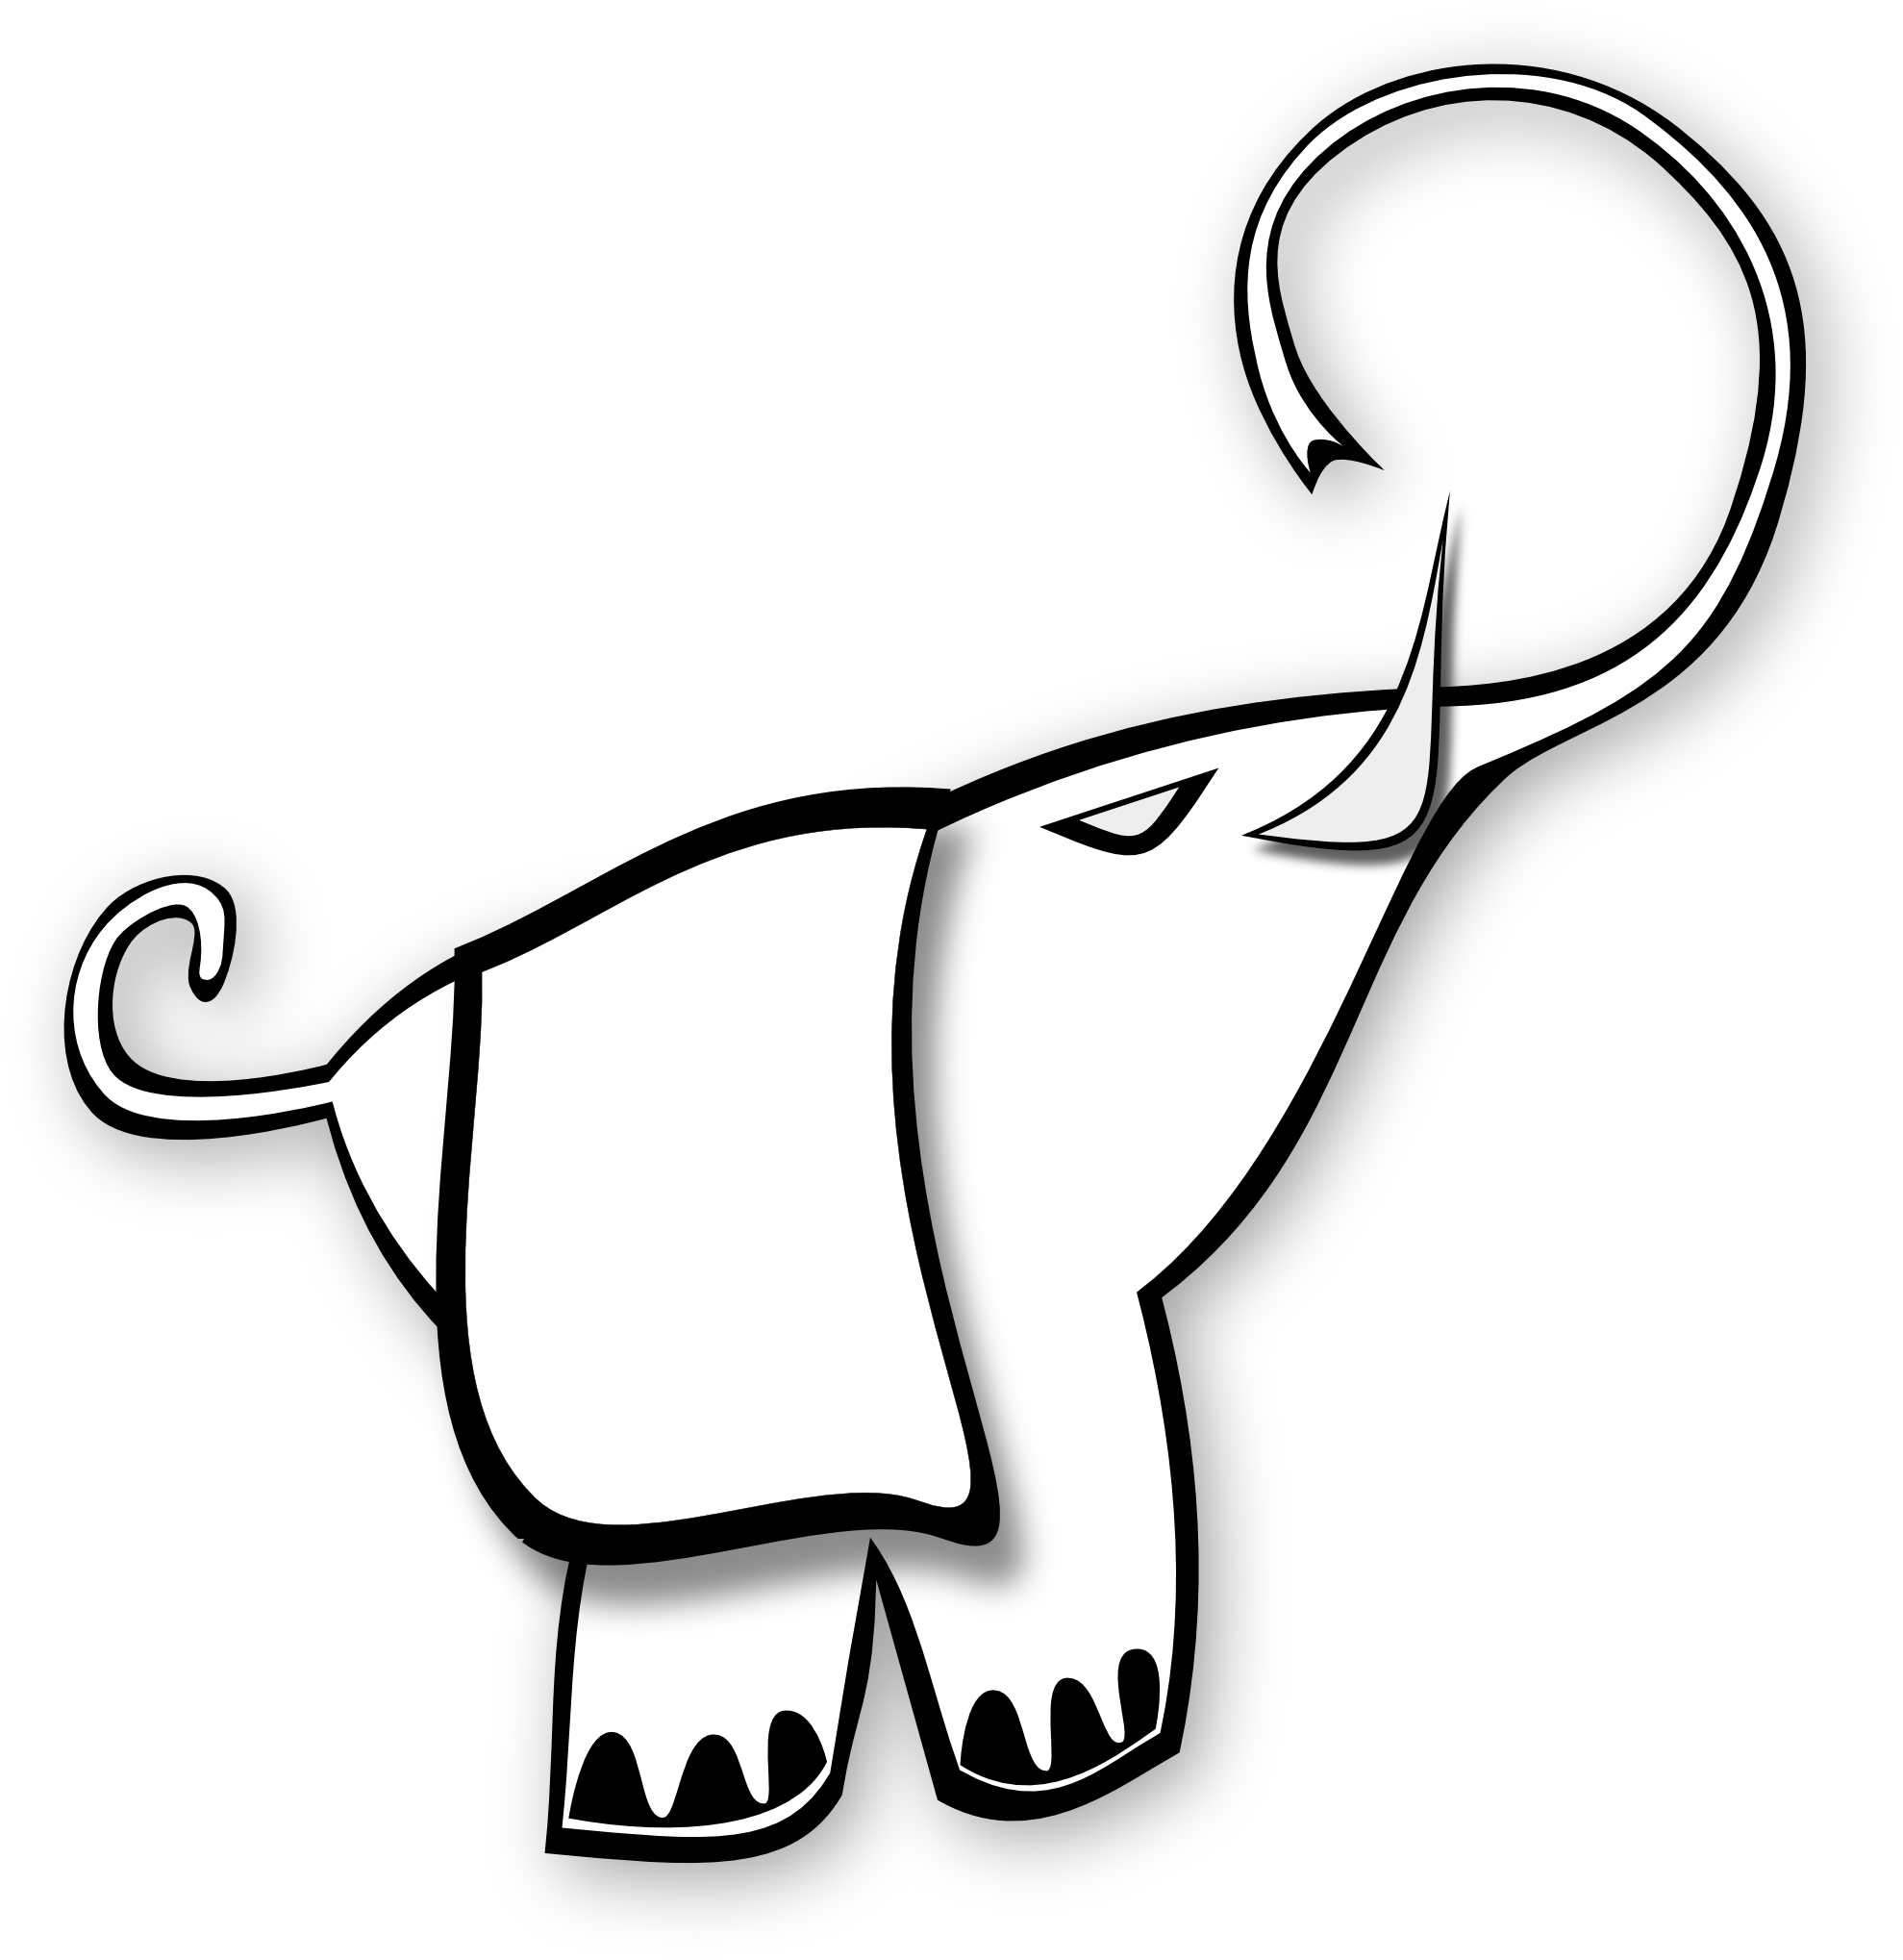 clipart elephant coloring